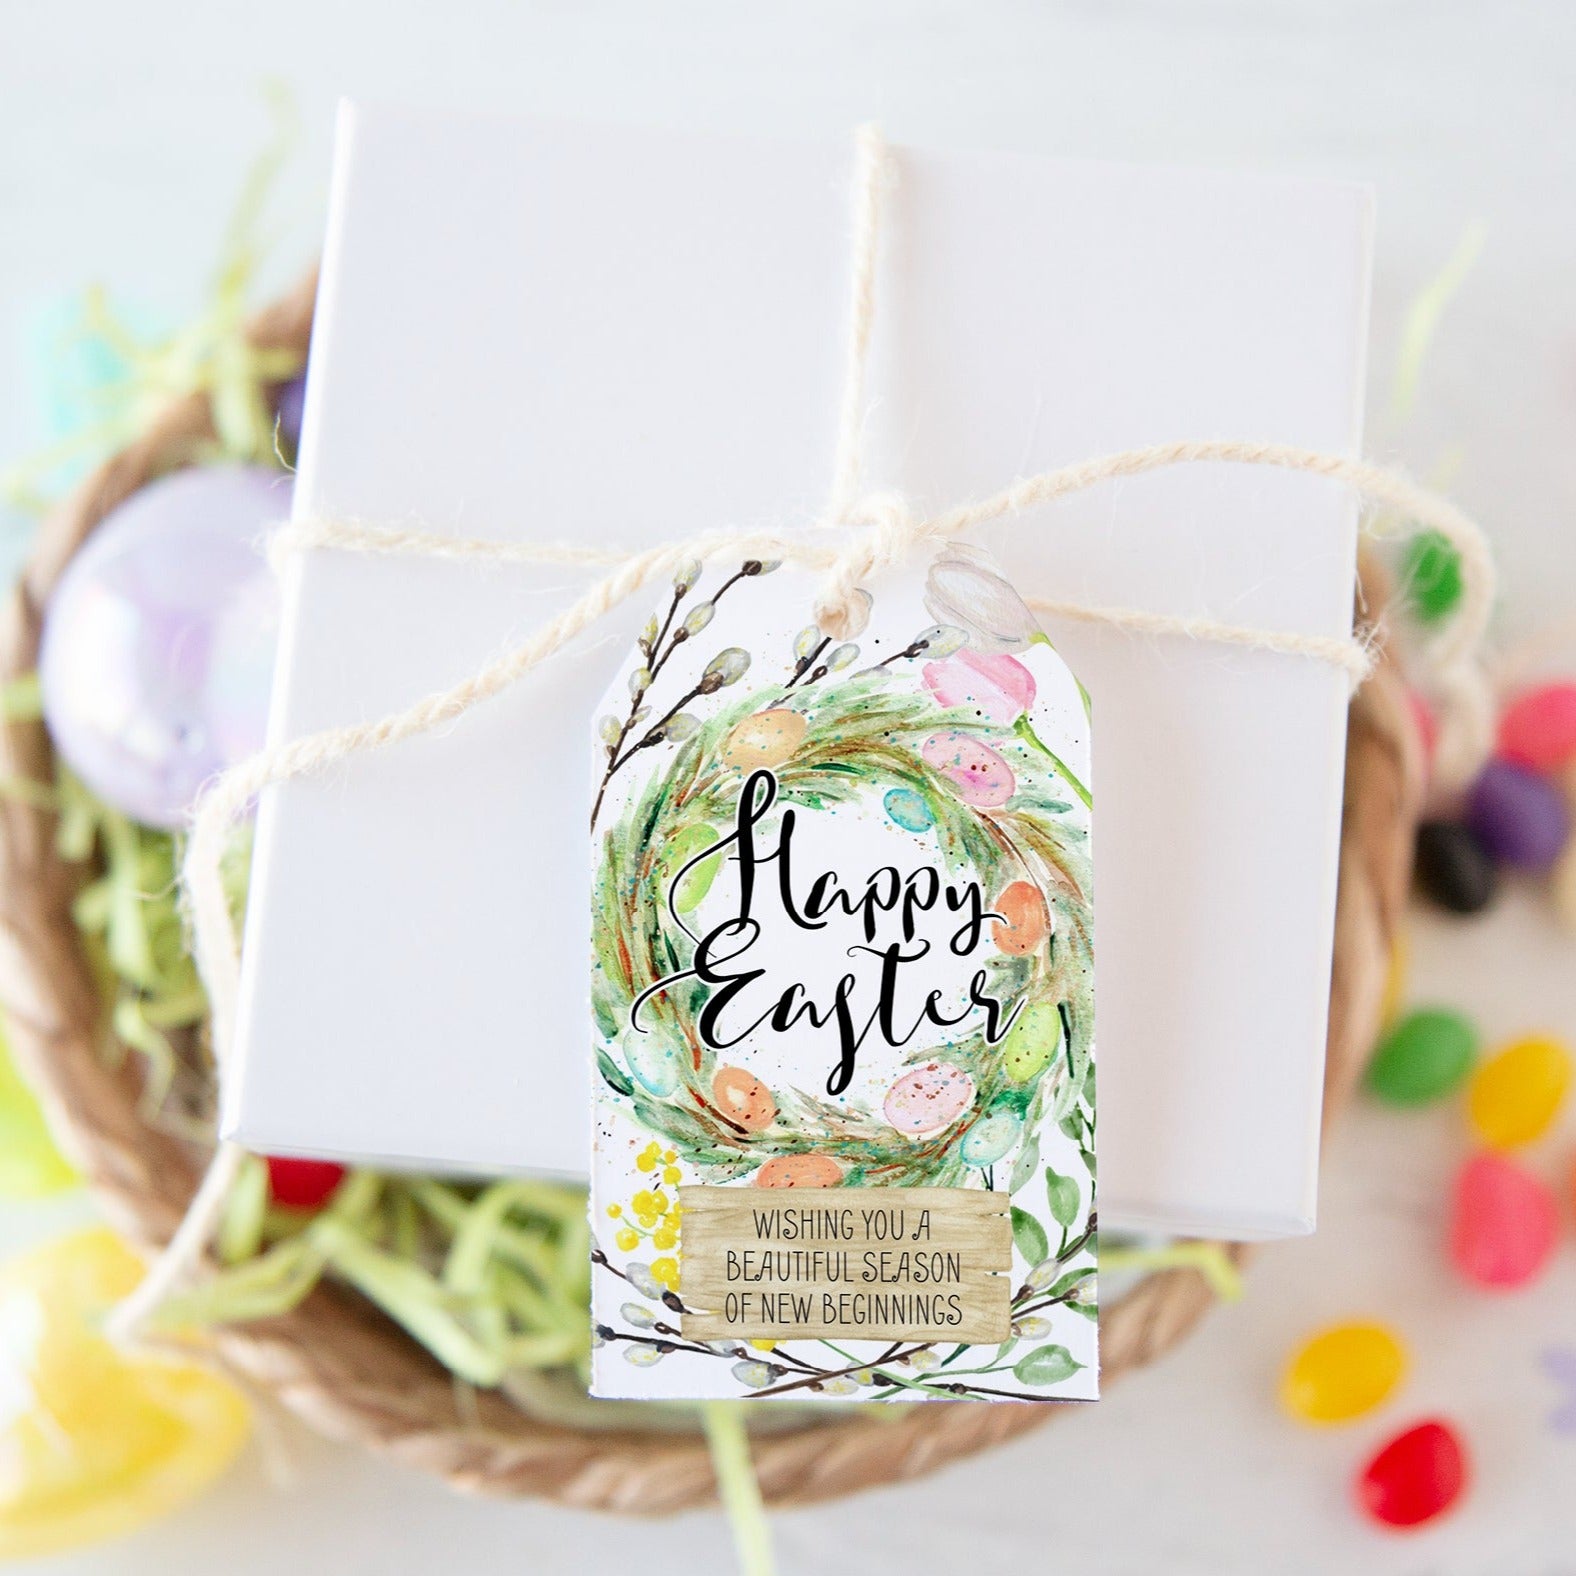 Easter Gift Tags - Botanical Wreath with Colorful Eggs